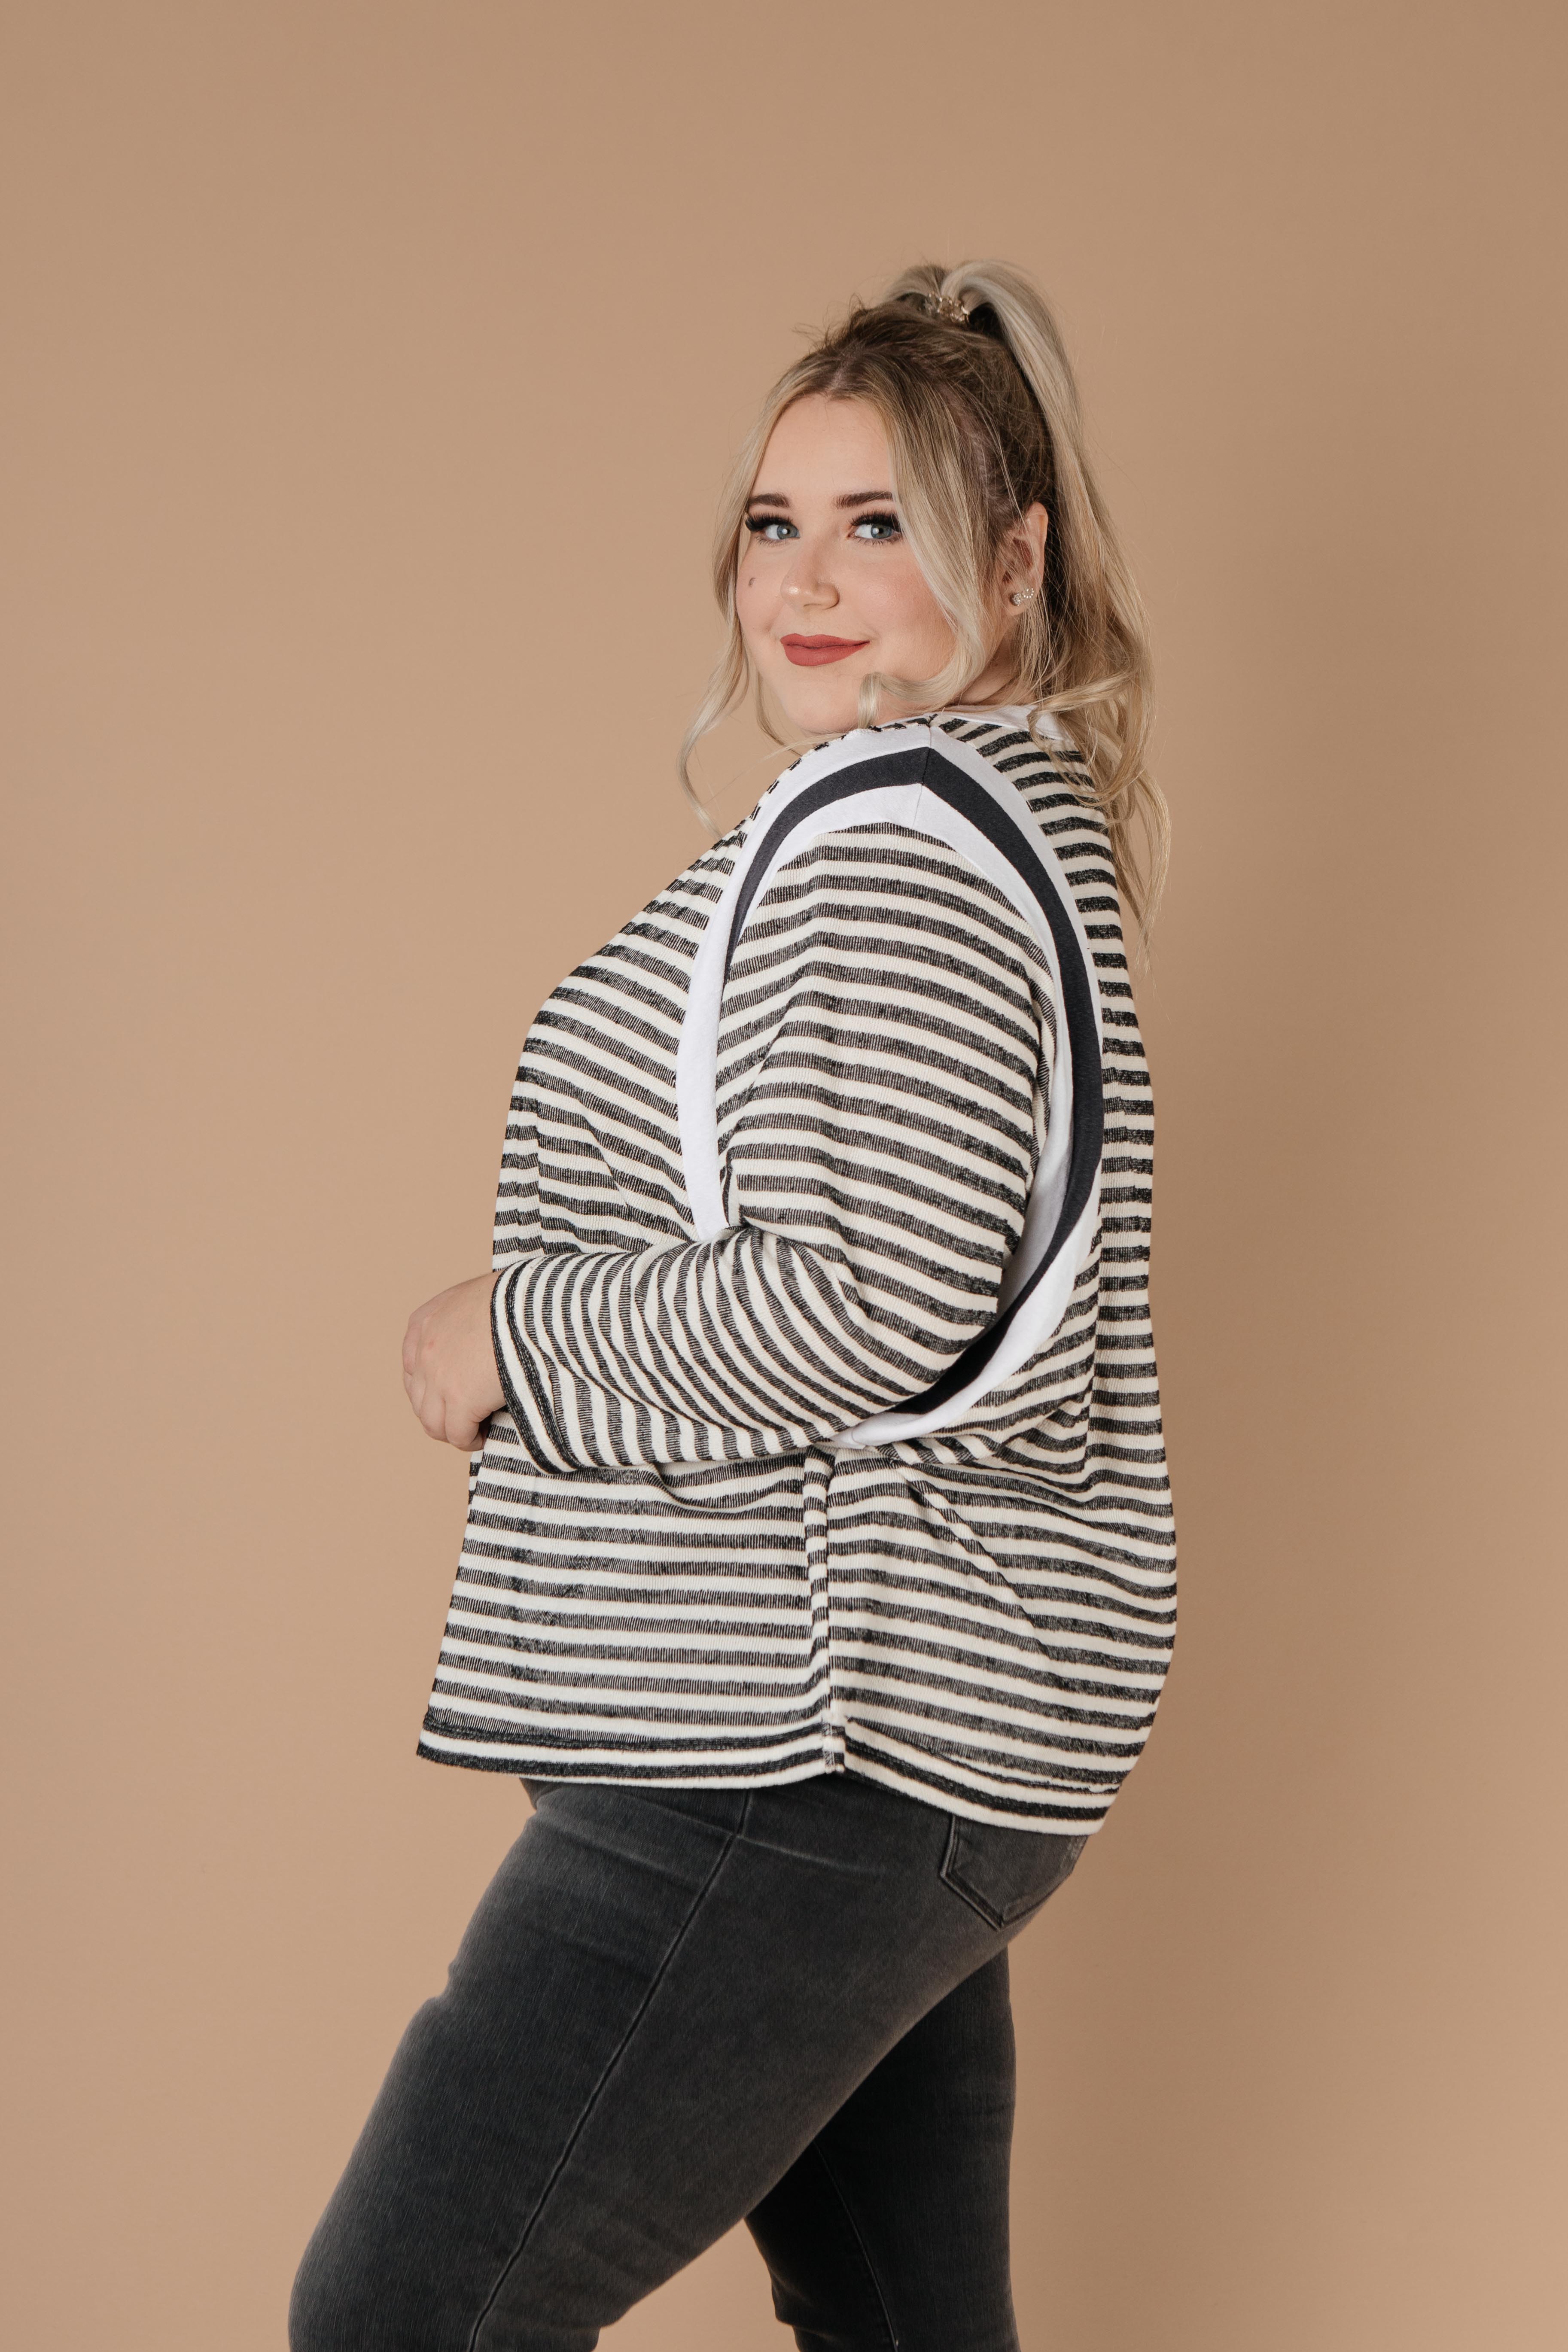 Double Trouble Striped Top